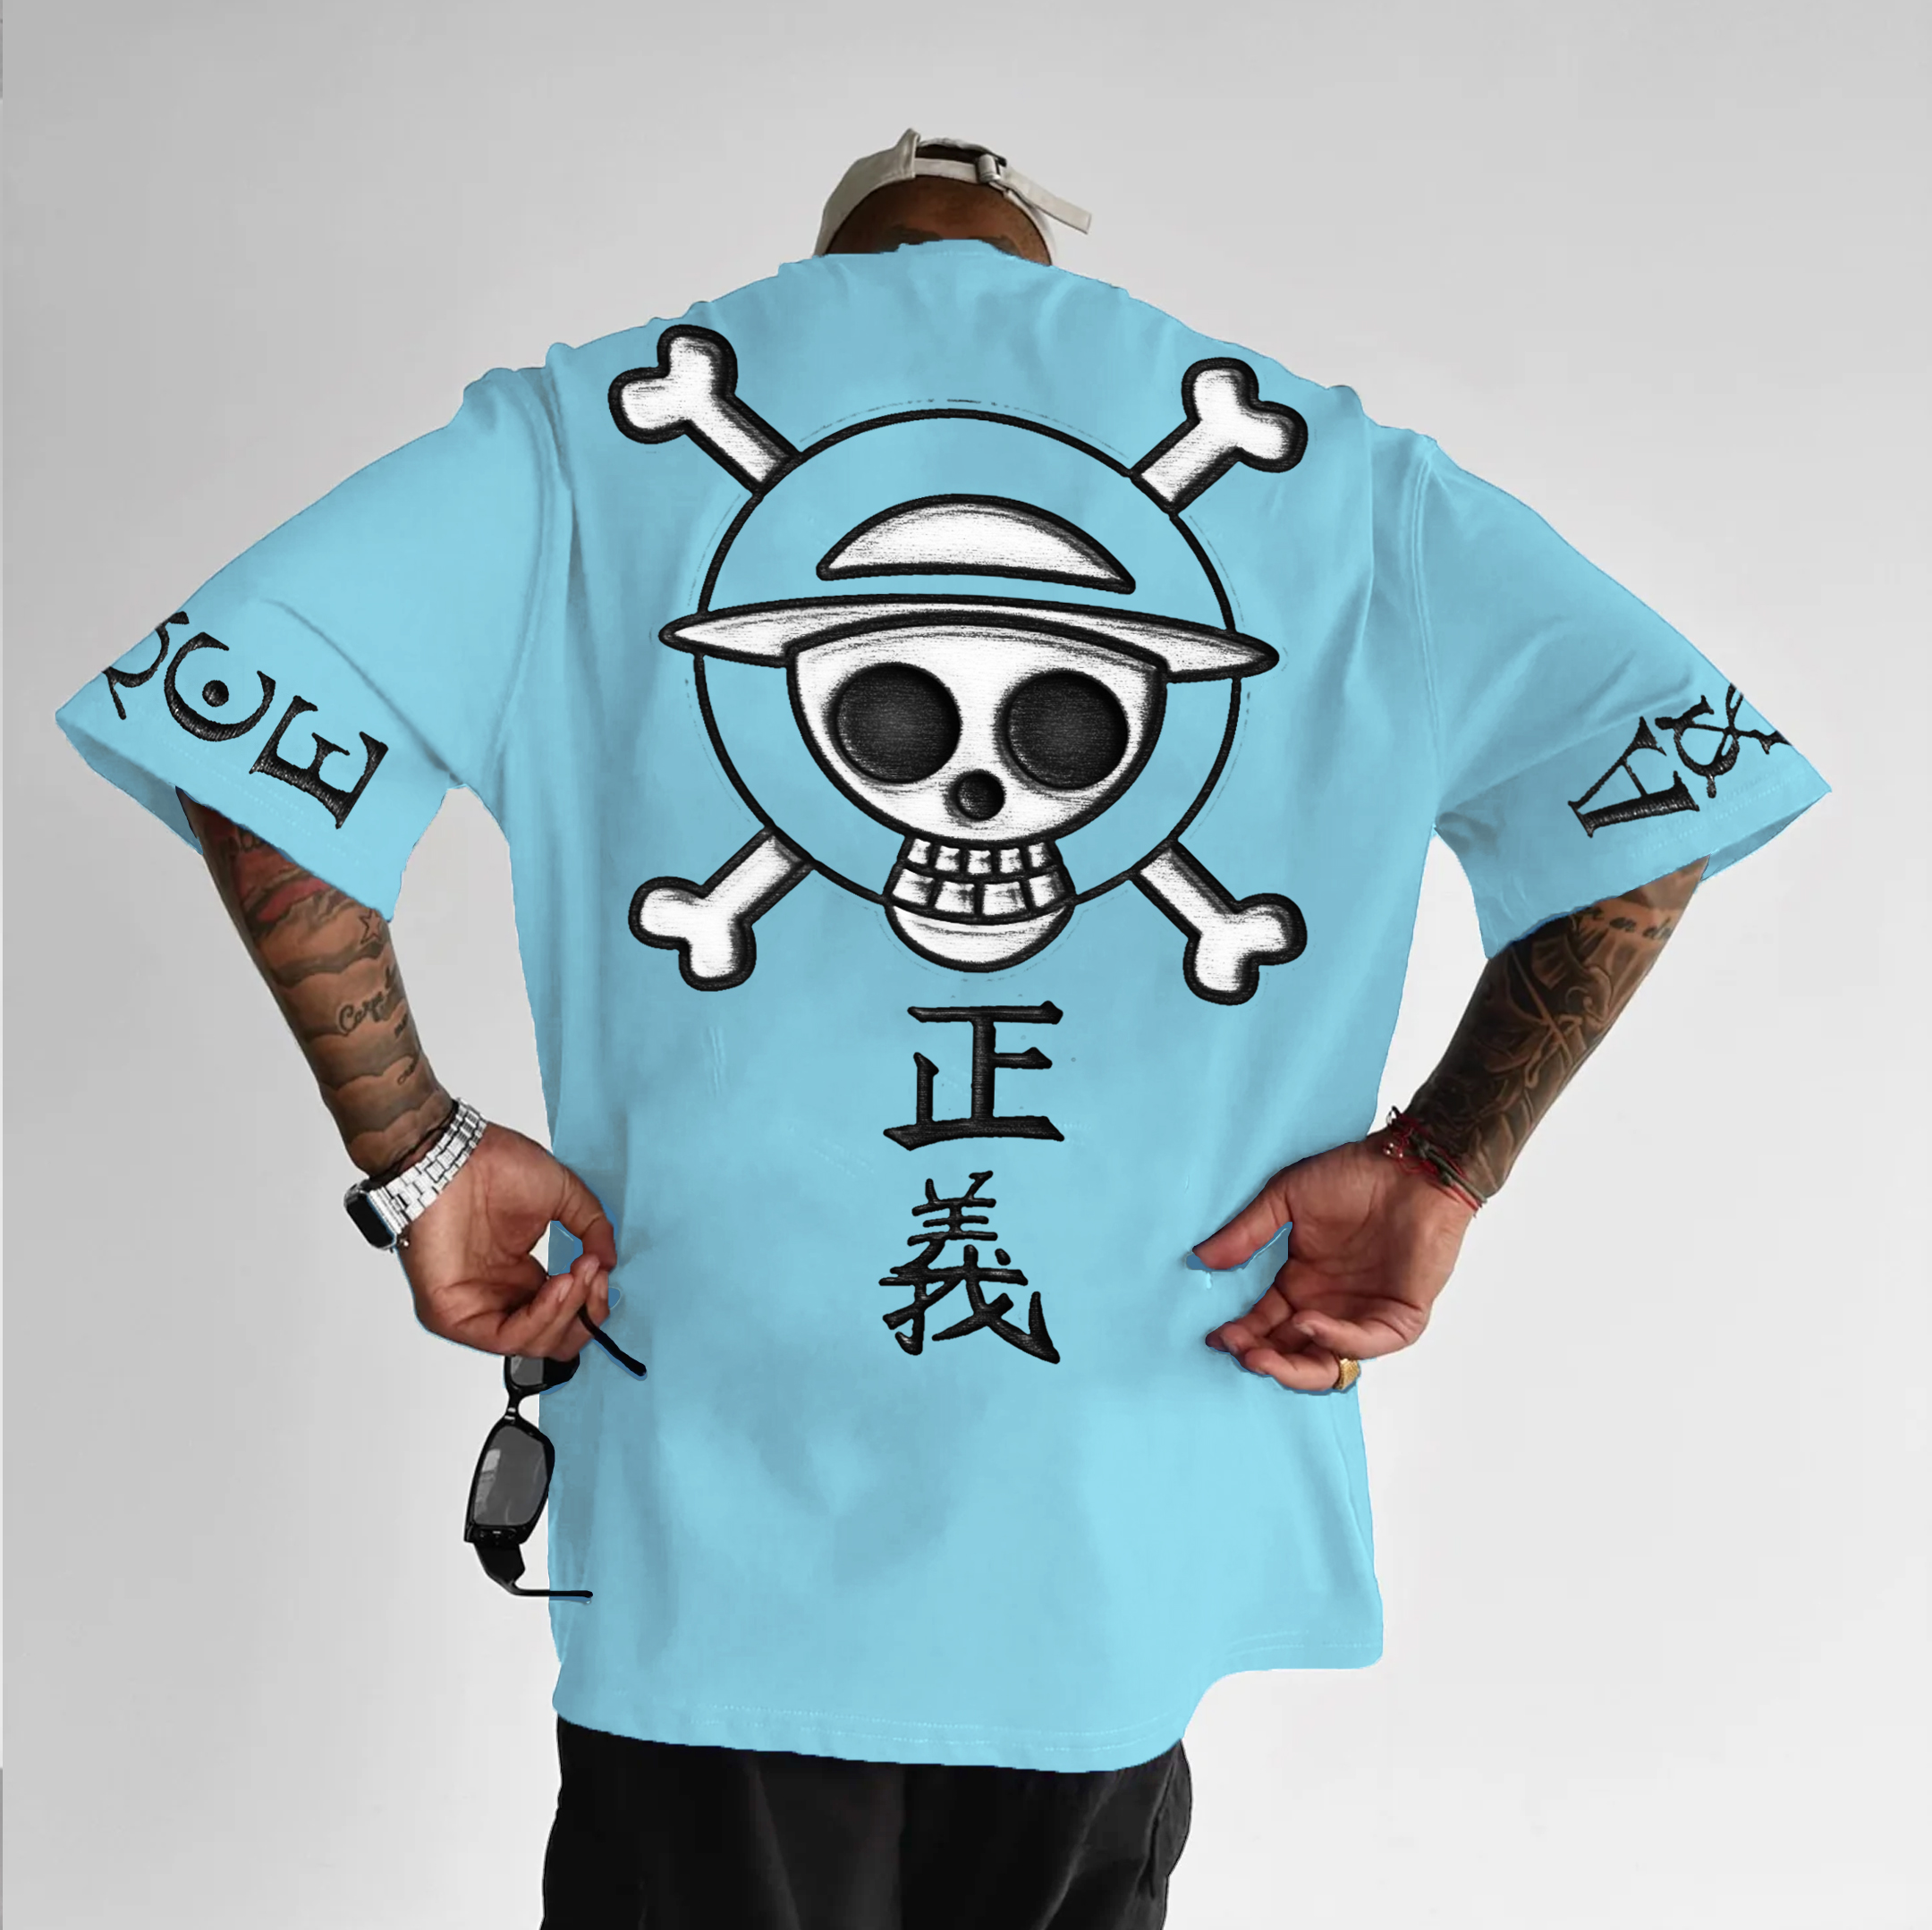 Unisex One Piece Embroidered Anime T-Shirt